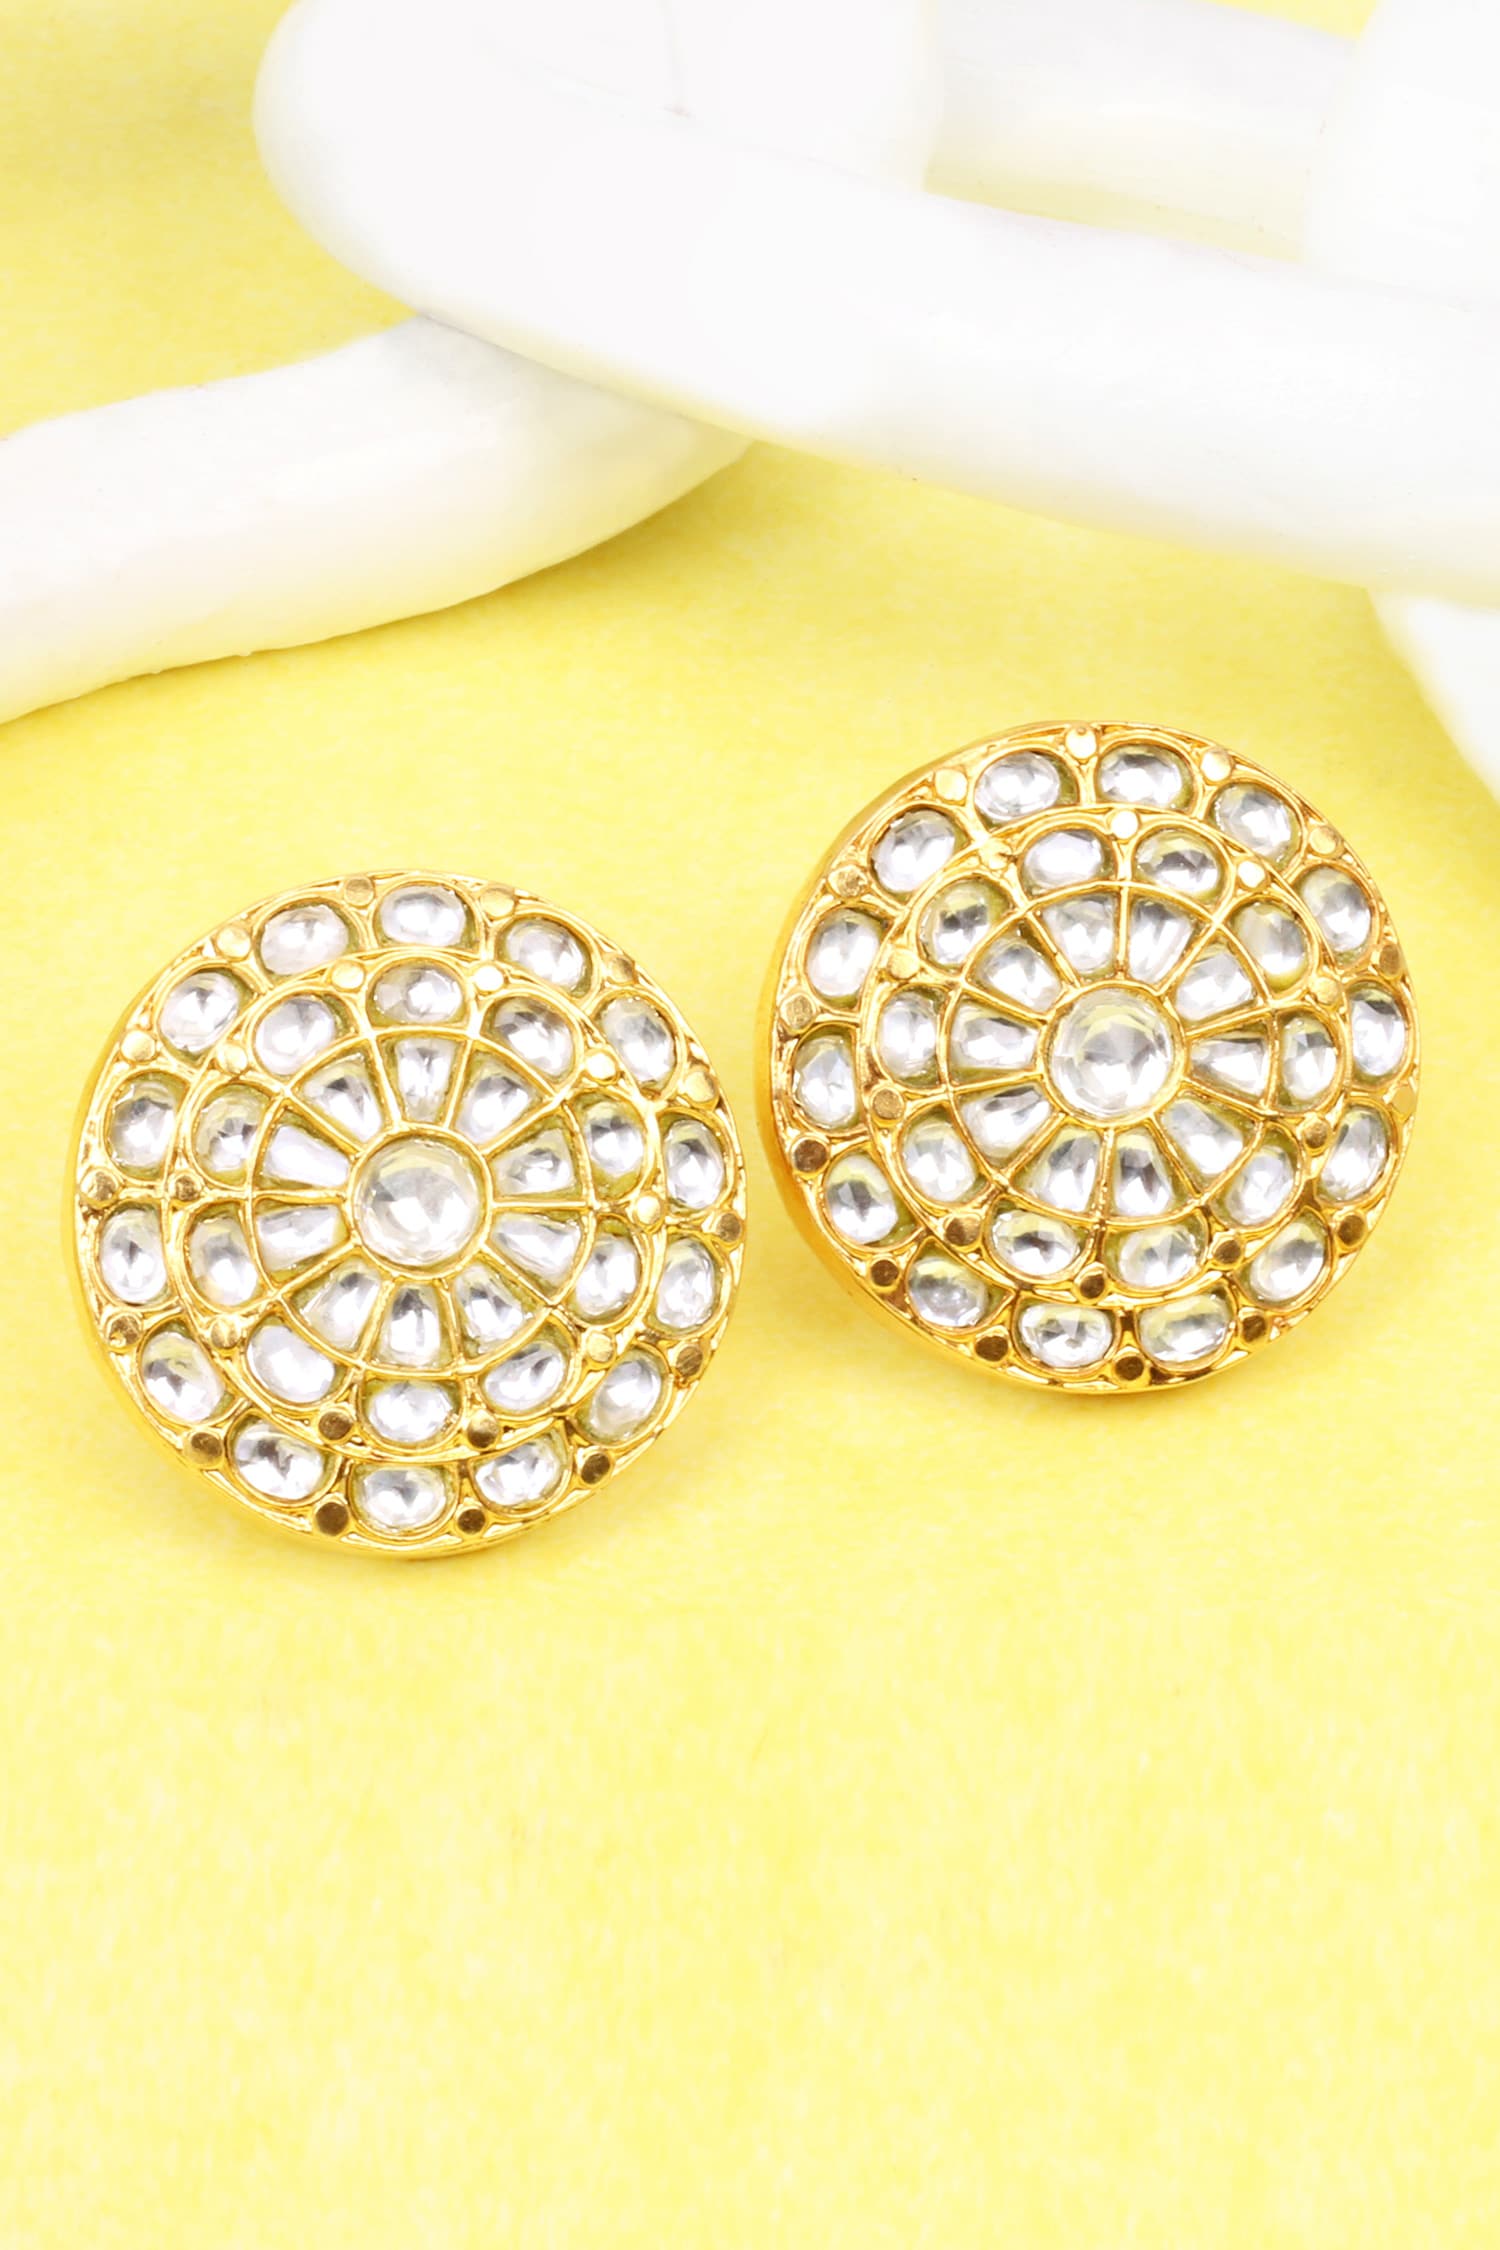 Large Circle Stud Earrings: Attention-Grabbing Statement Pieces 0286 –  Virginia Wynne Designs